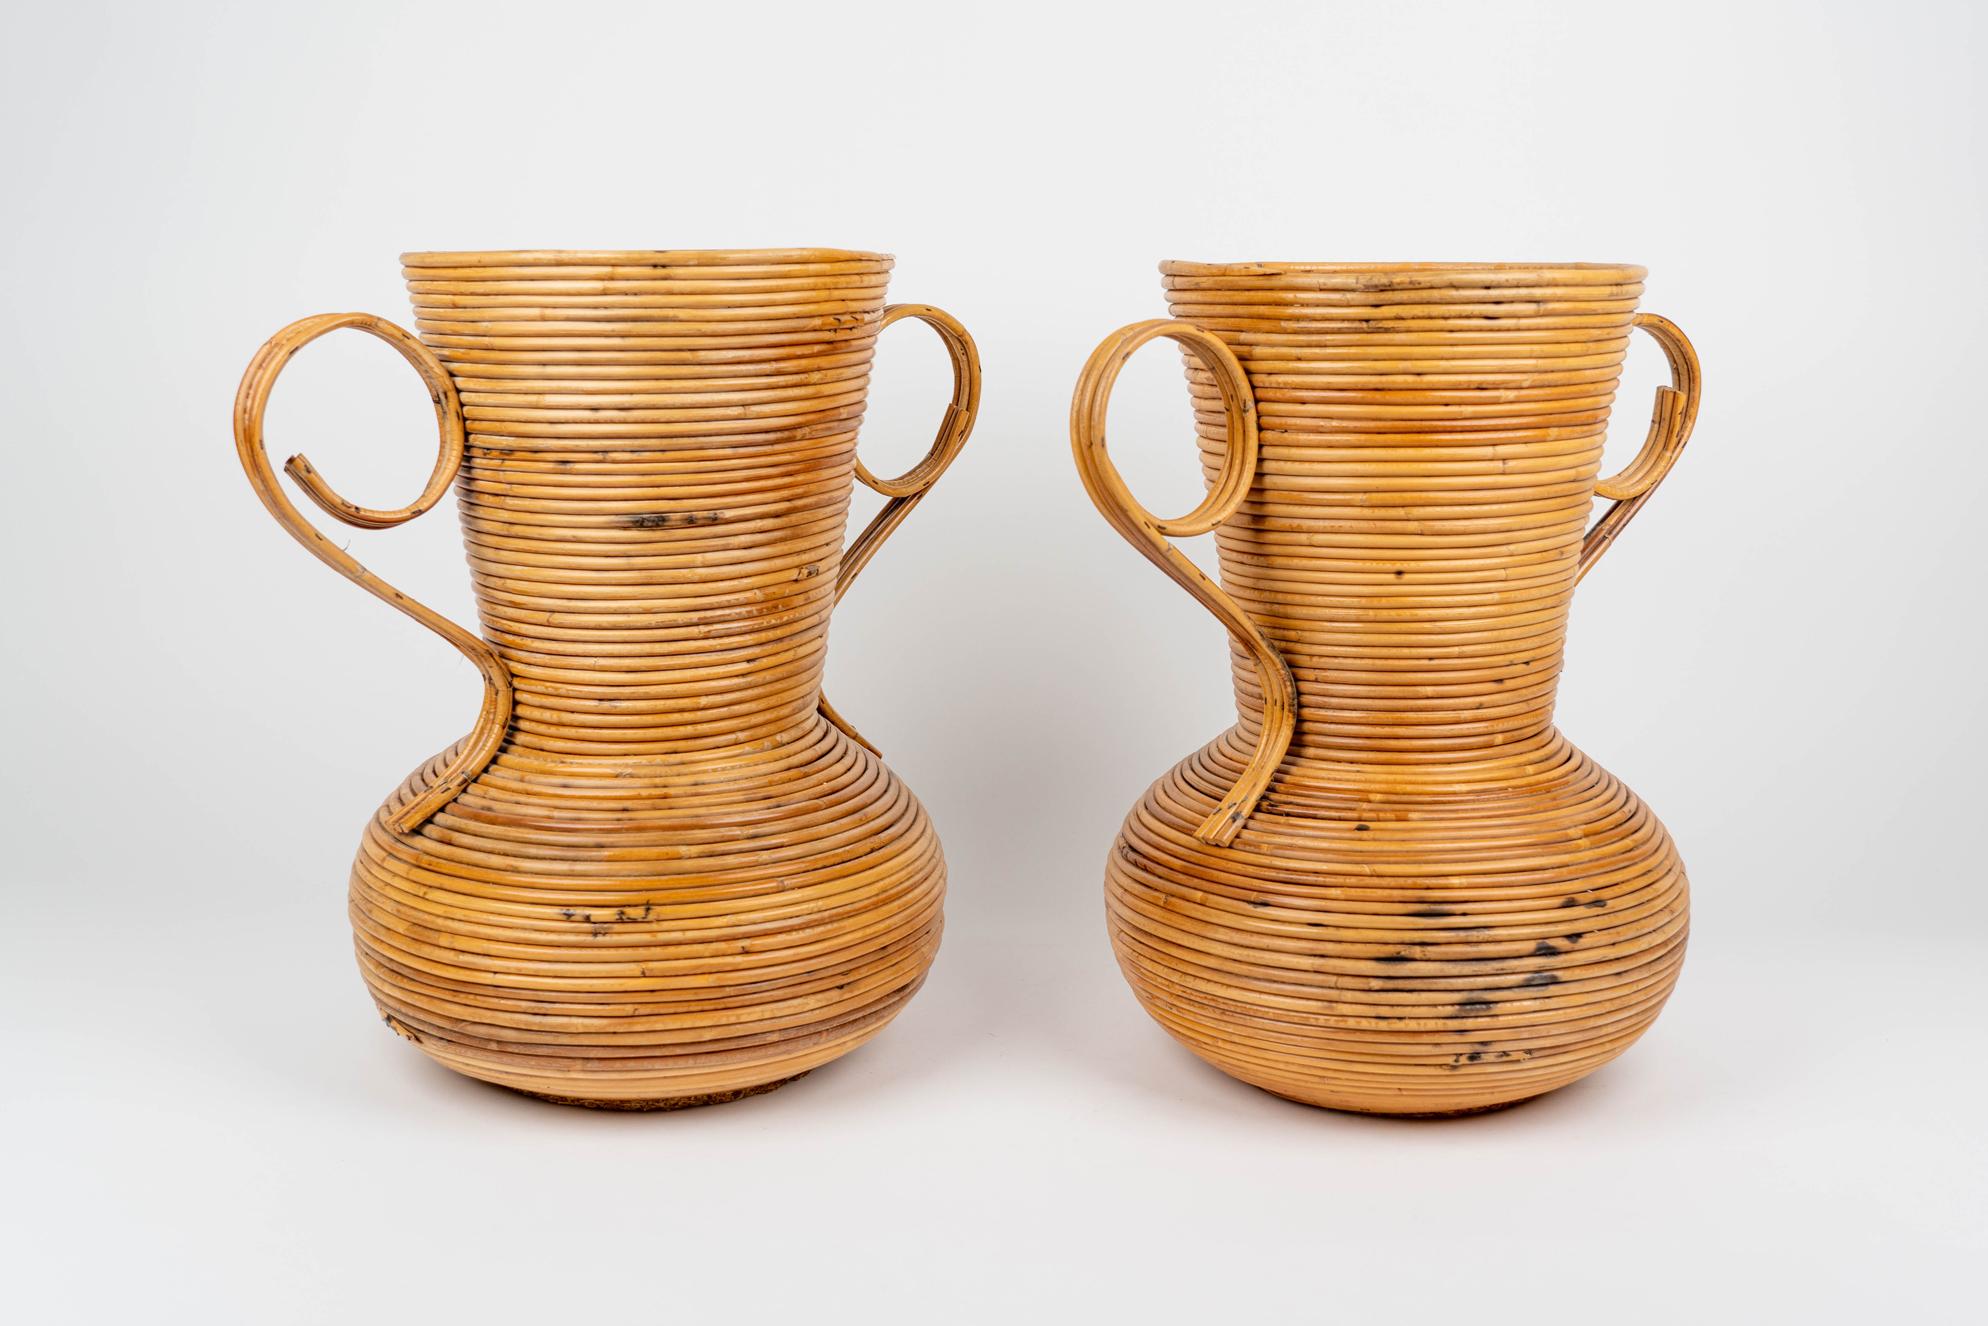 Italian Pair of Rattan Amphoras Vases by Vivai del Sud, Italy 1960s For Sale